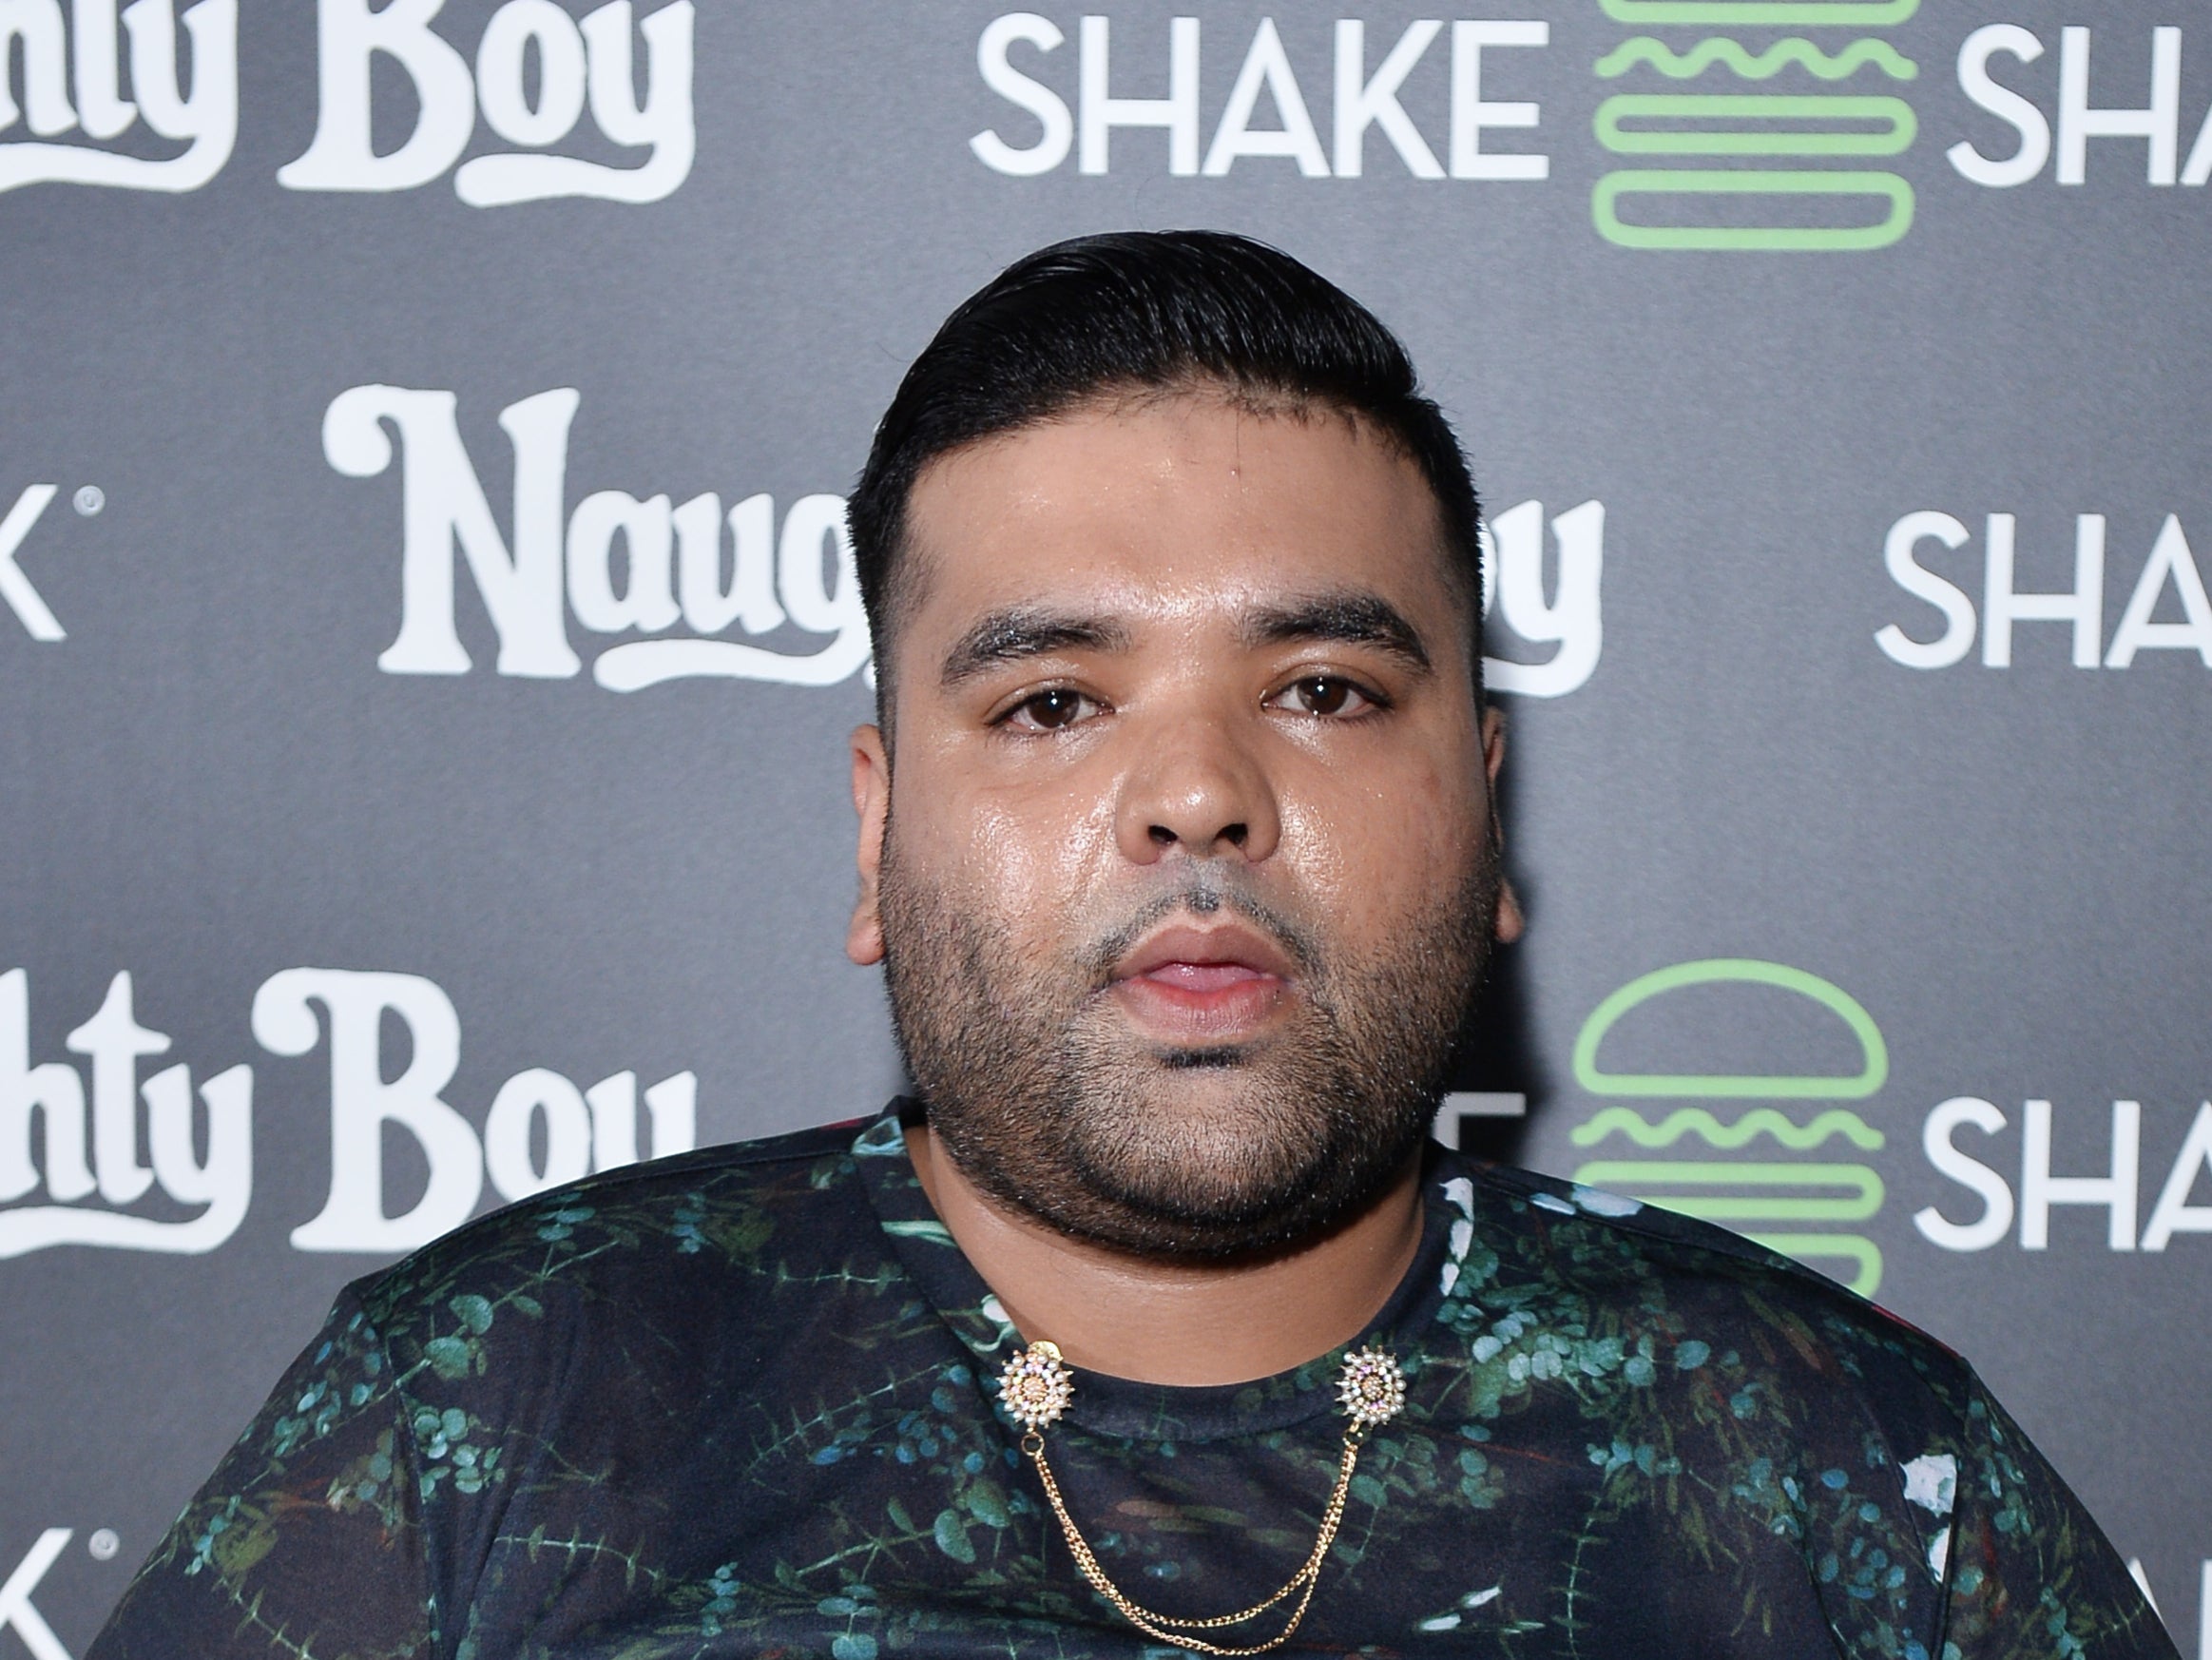 Naughty Boy was reportedly due to appear on this year’s ‘I’m a Celebrity’ in Jordan North’s place